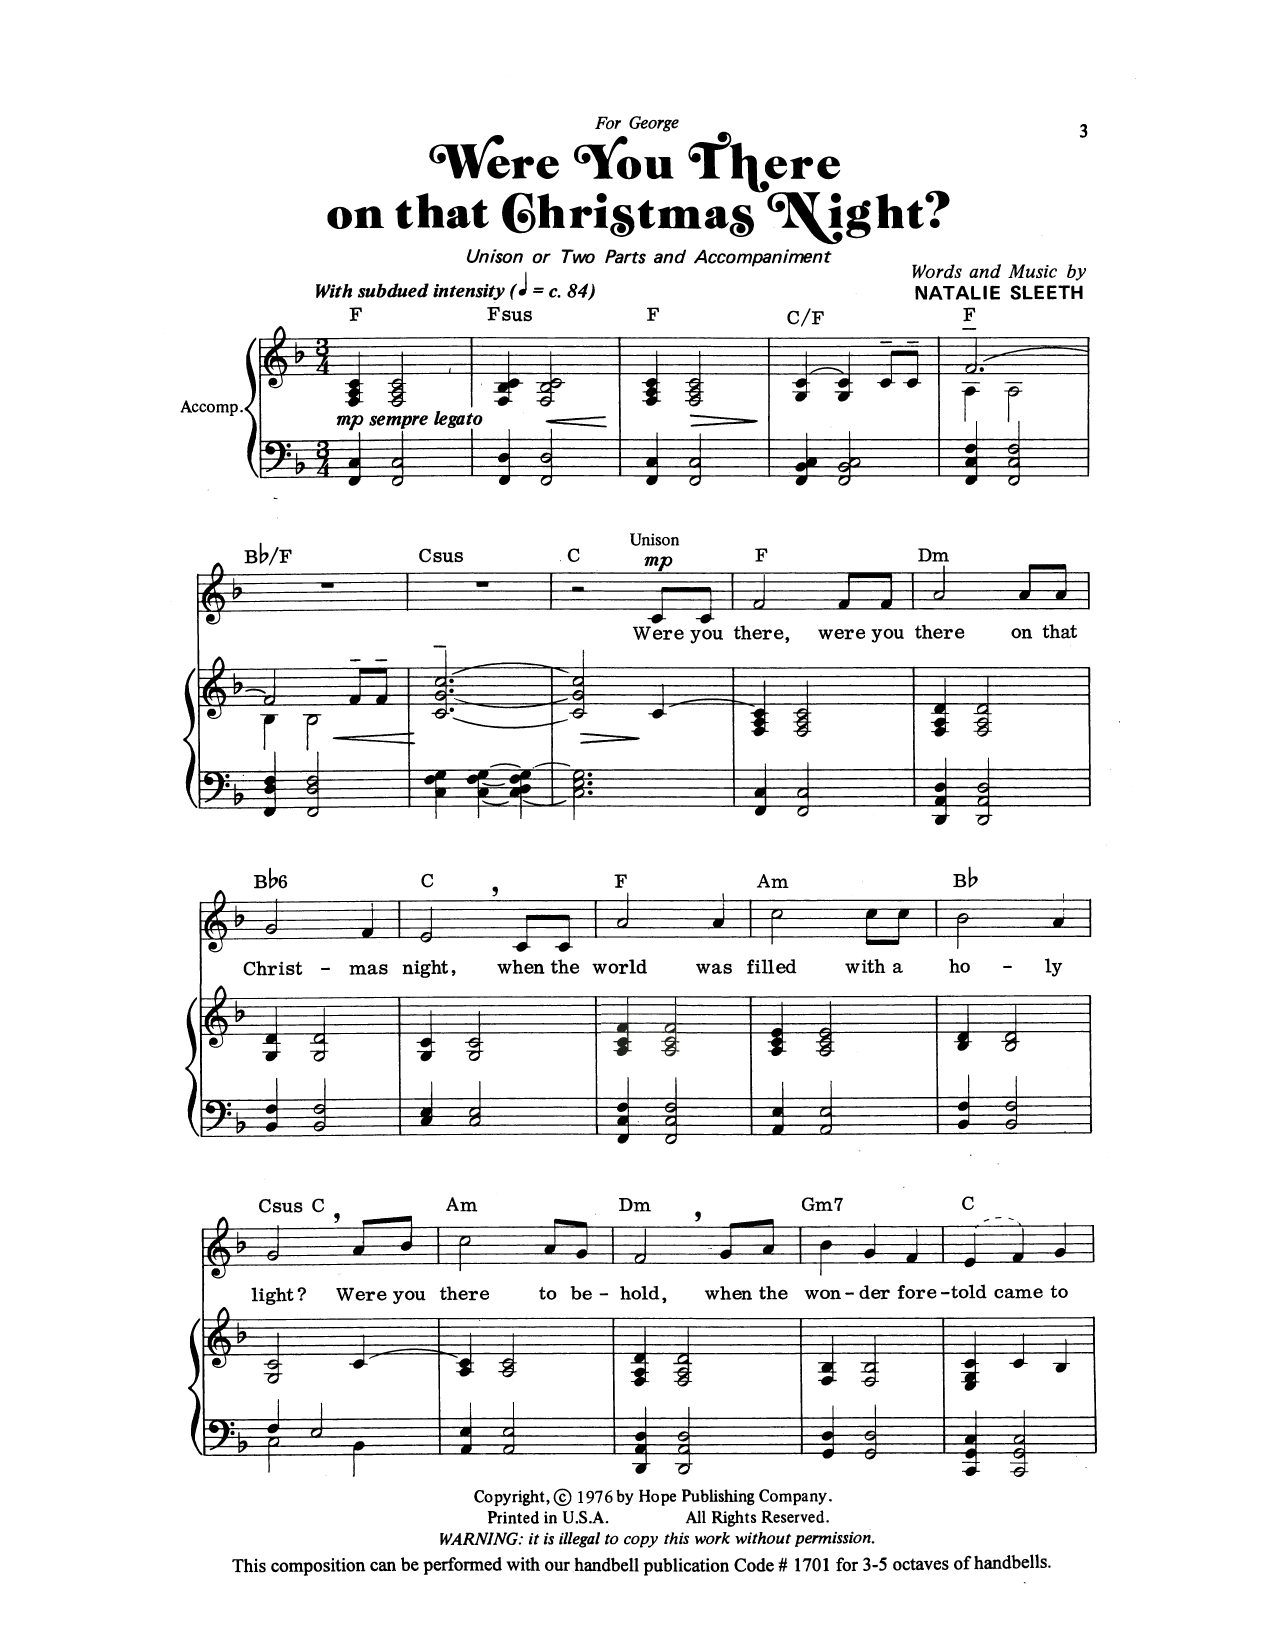 Download Natalie Sleeth Were You There On That Christmas Night? Sheet Music